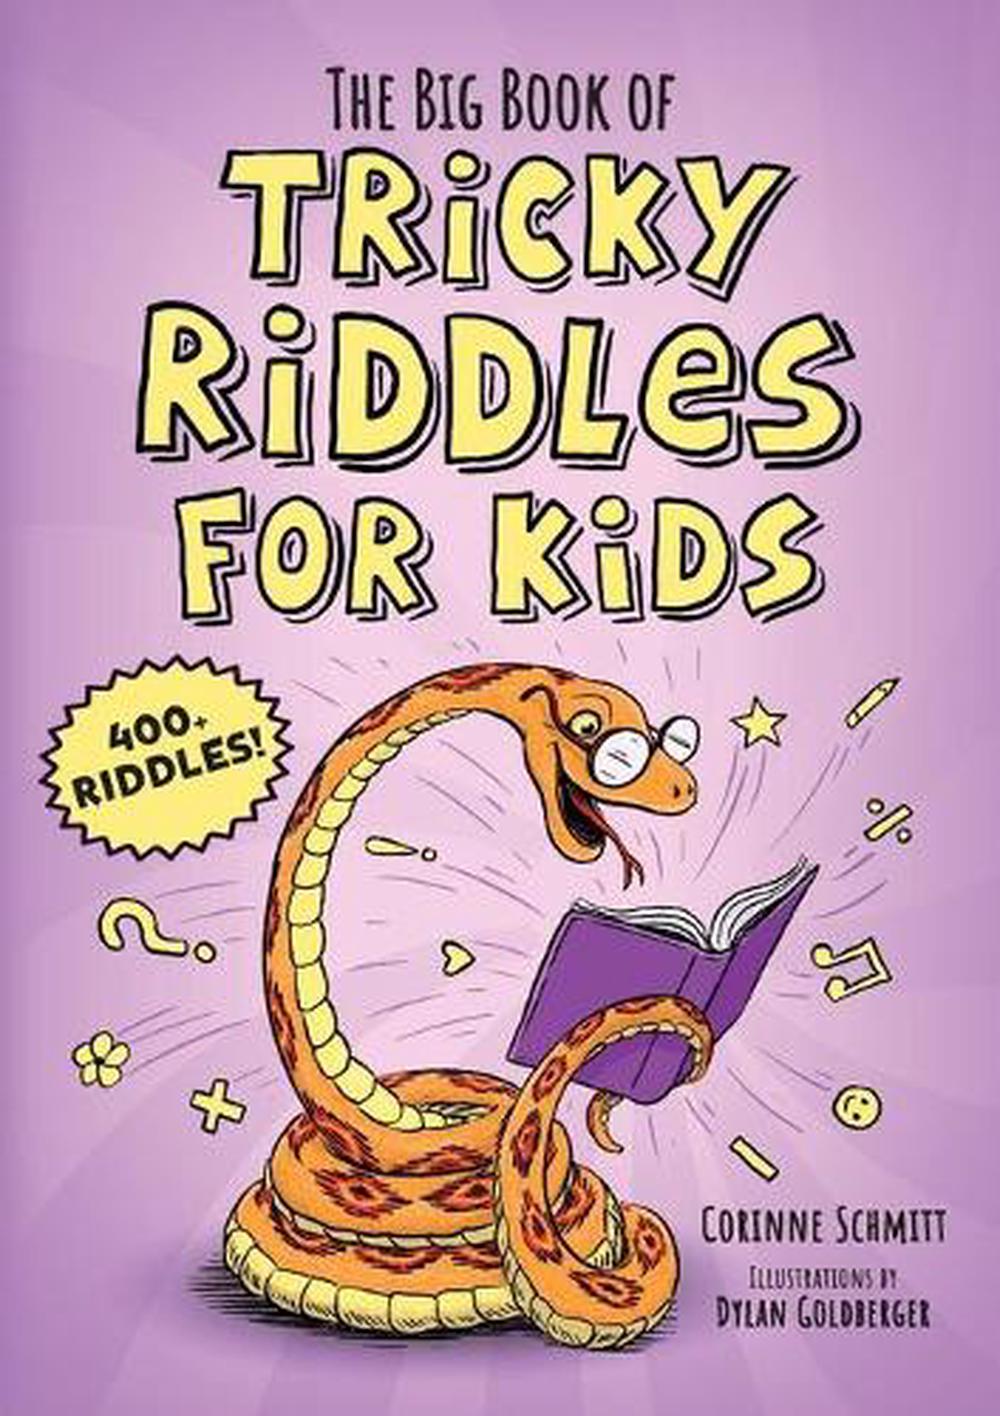 riddle-books-for-kids-age-9-12-by-corinne-schmitt-paperback